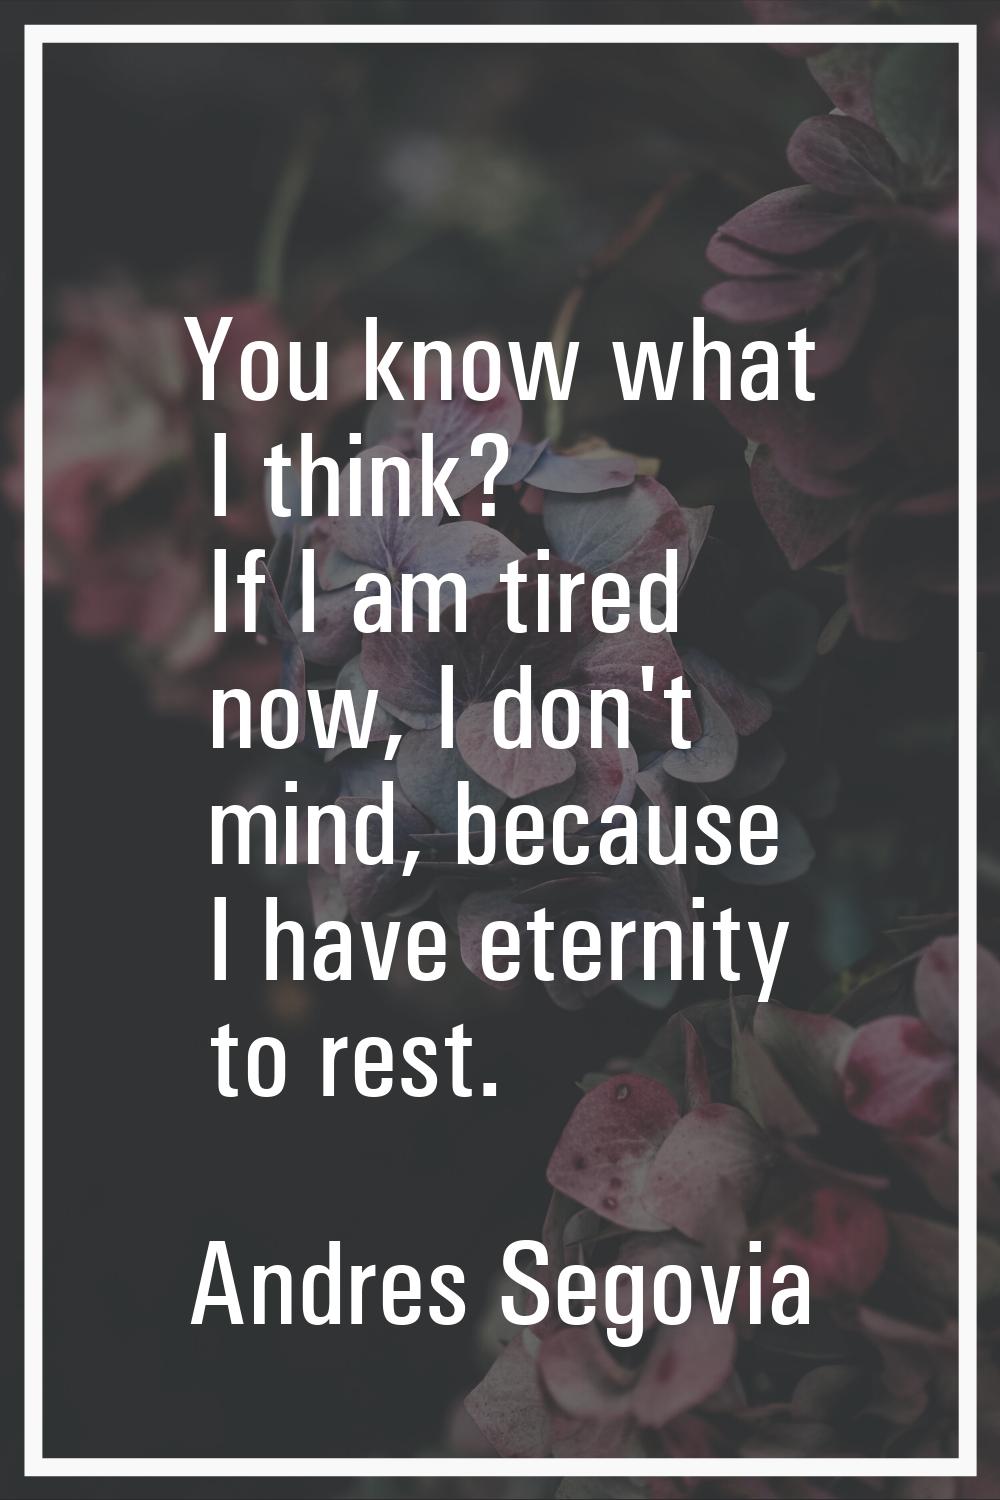 You know what I think? If I am tired now, I don't mind, because I have eternity to rest.